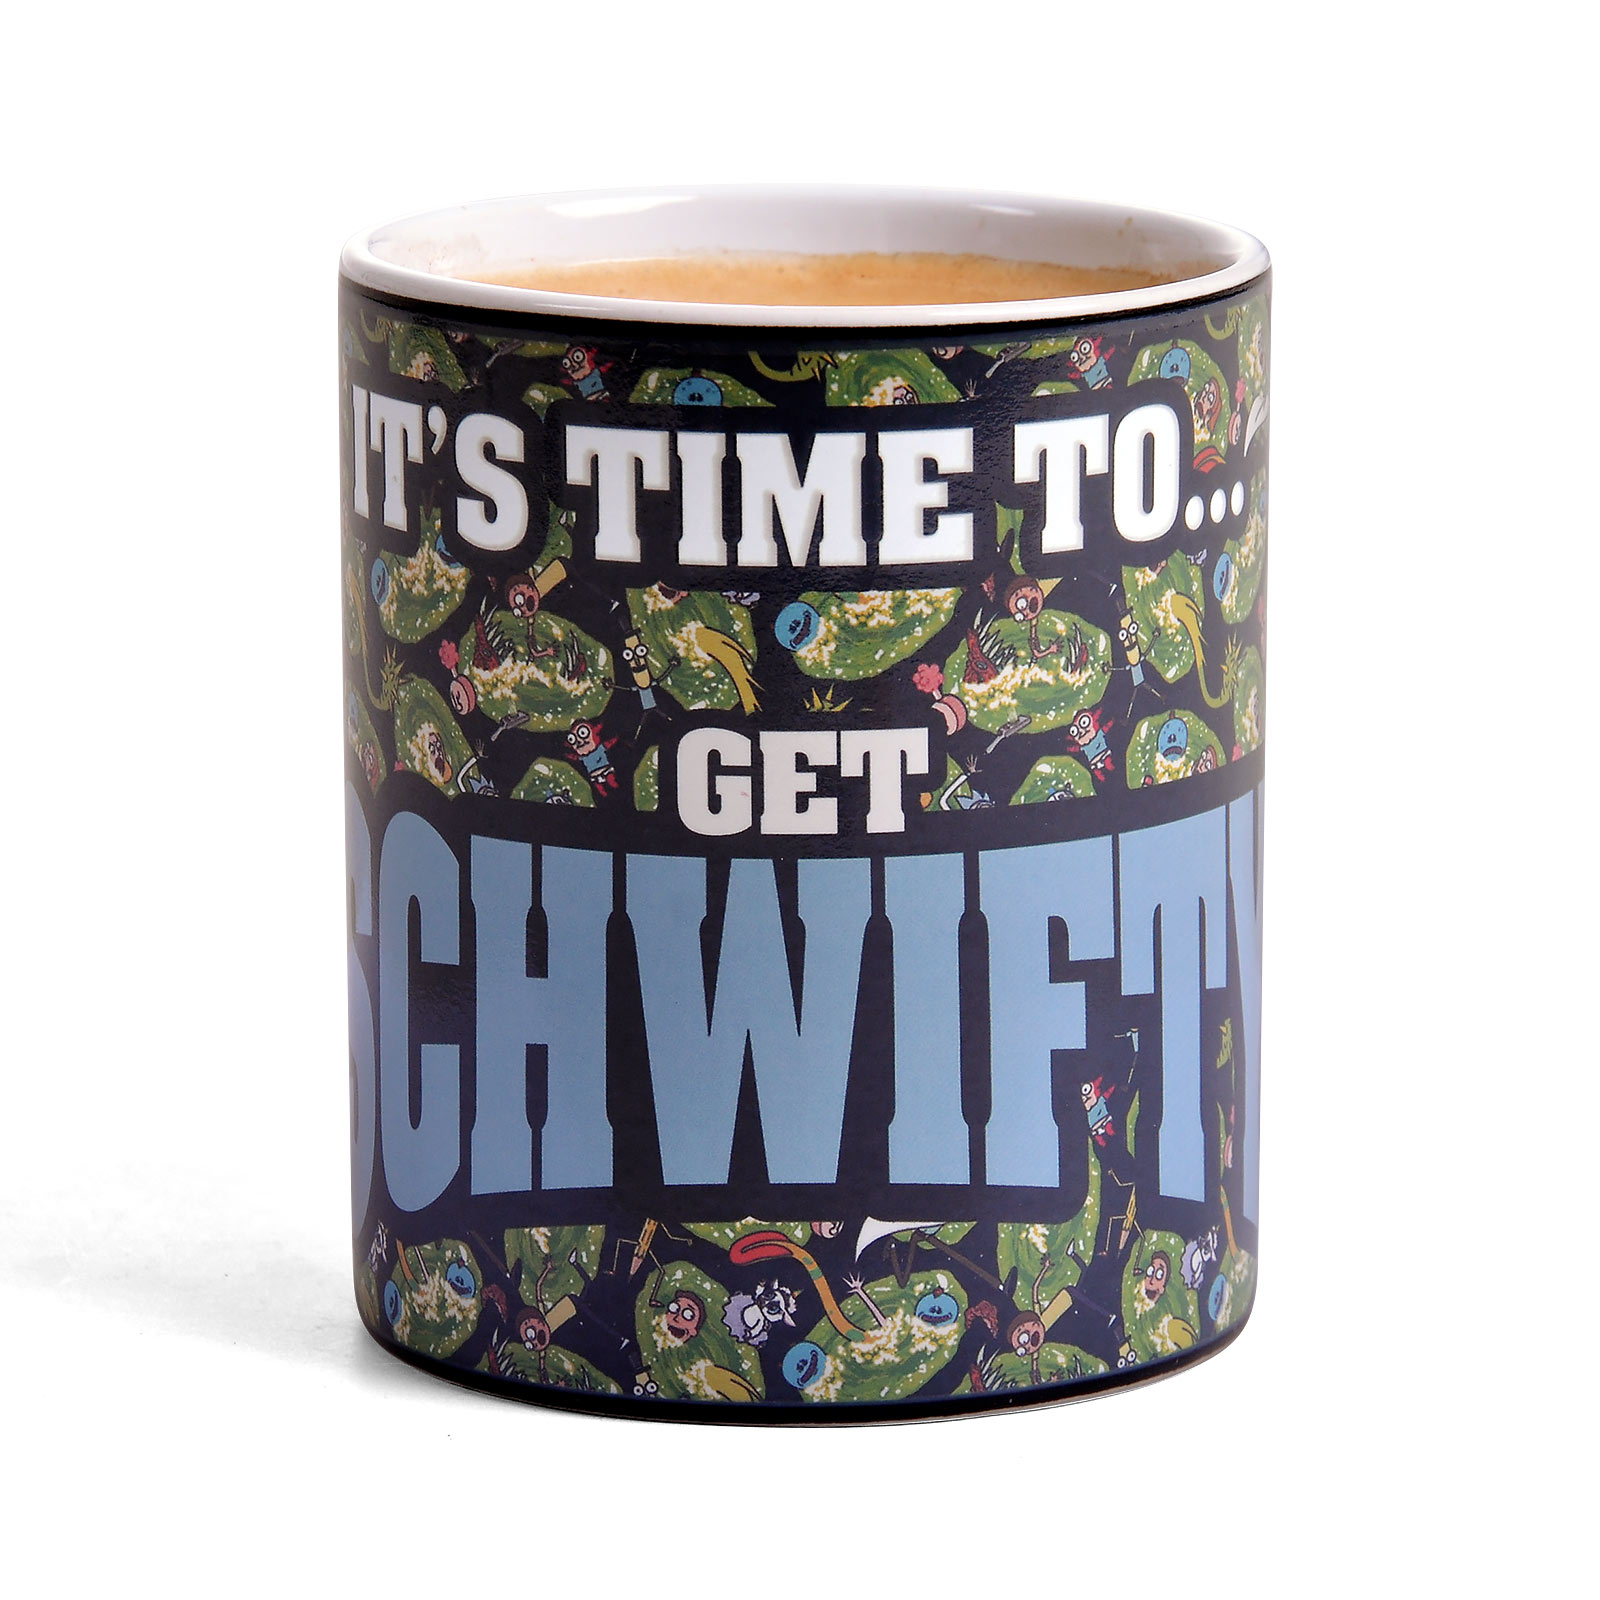 Rick and Morty - Get Schwifty thermo effect mug